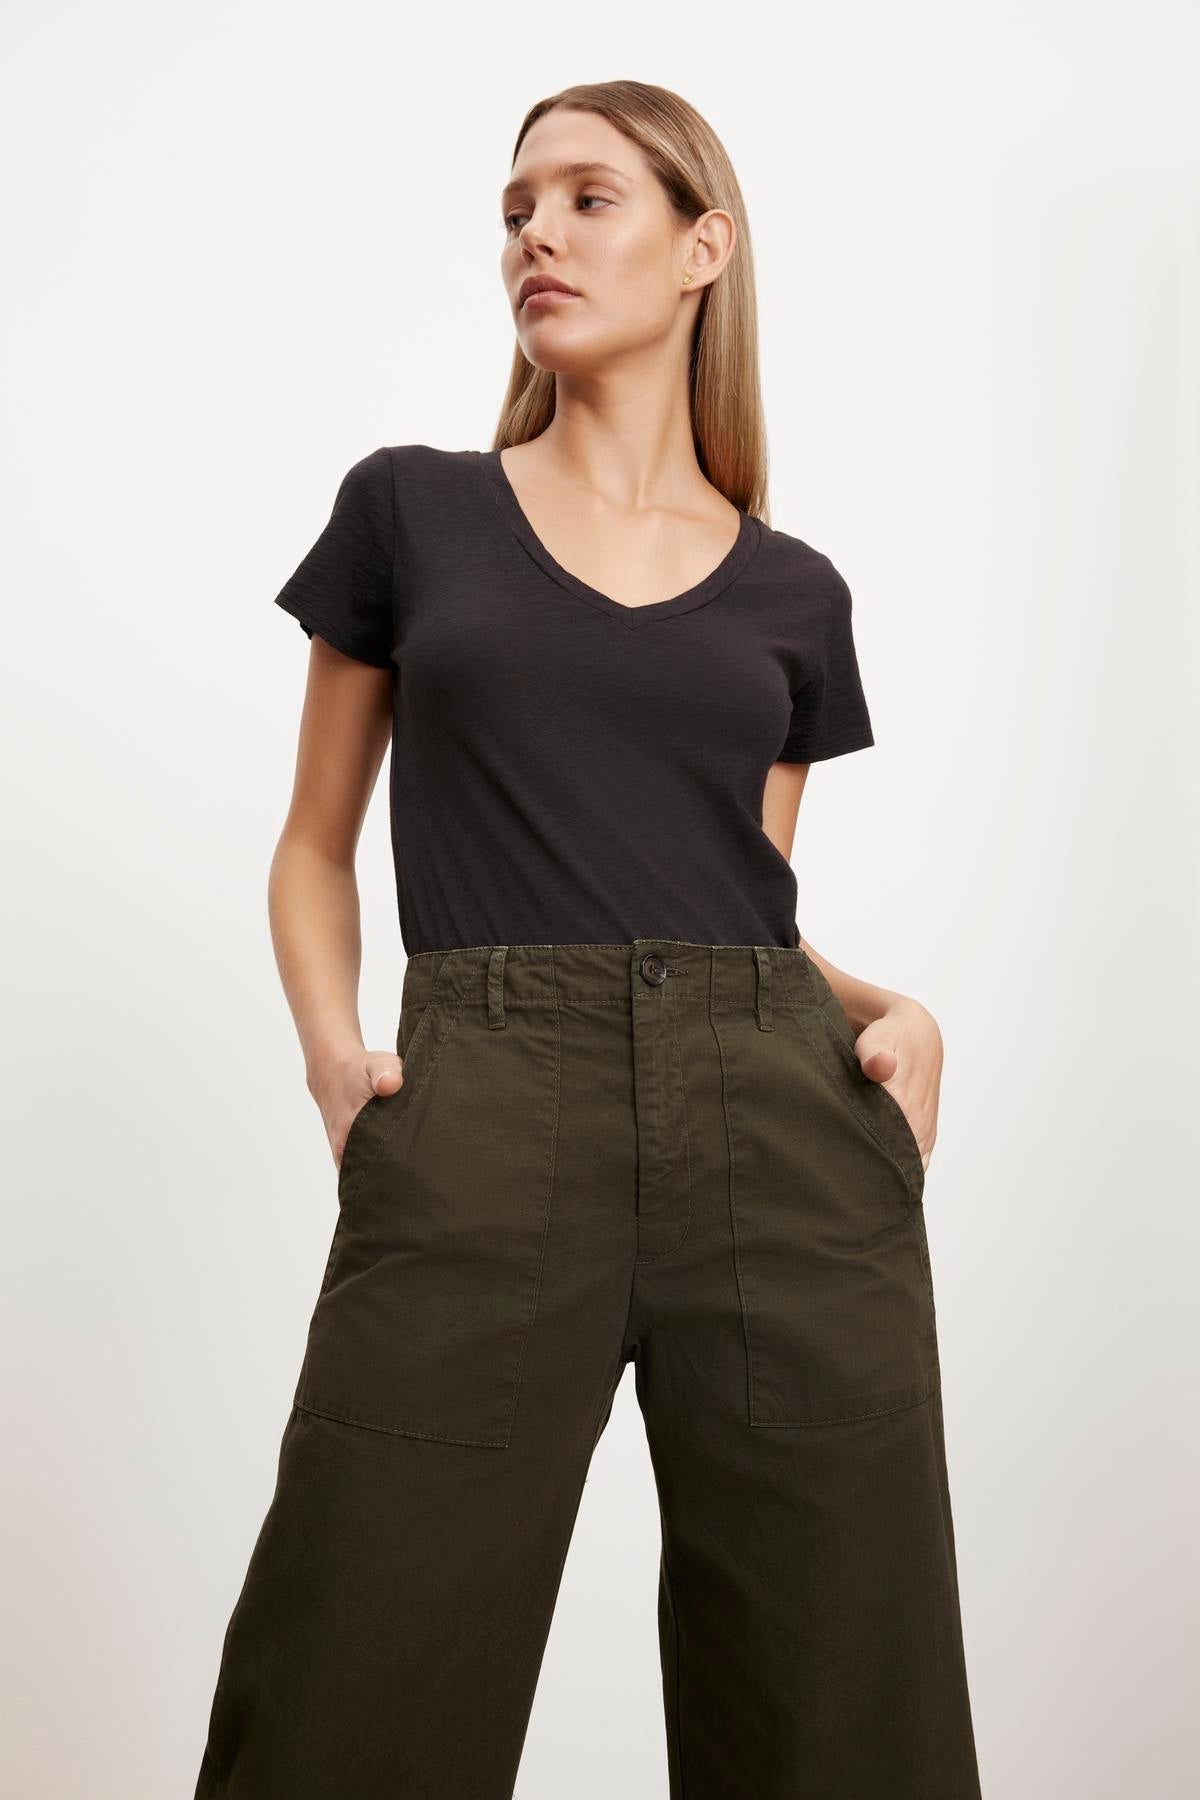   The model is wearing a t-shirt and Velvet by Graham & Spencer MYA COTTON CANVAS PANT. 